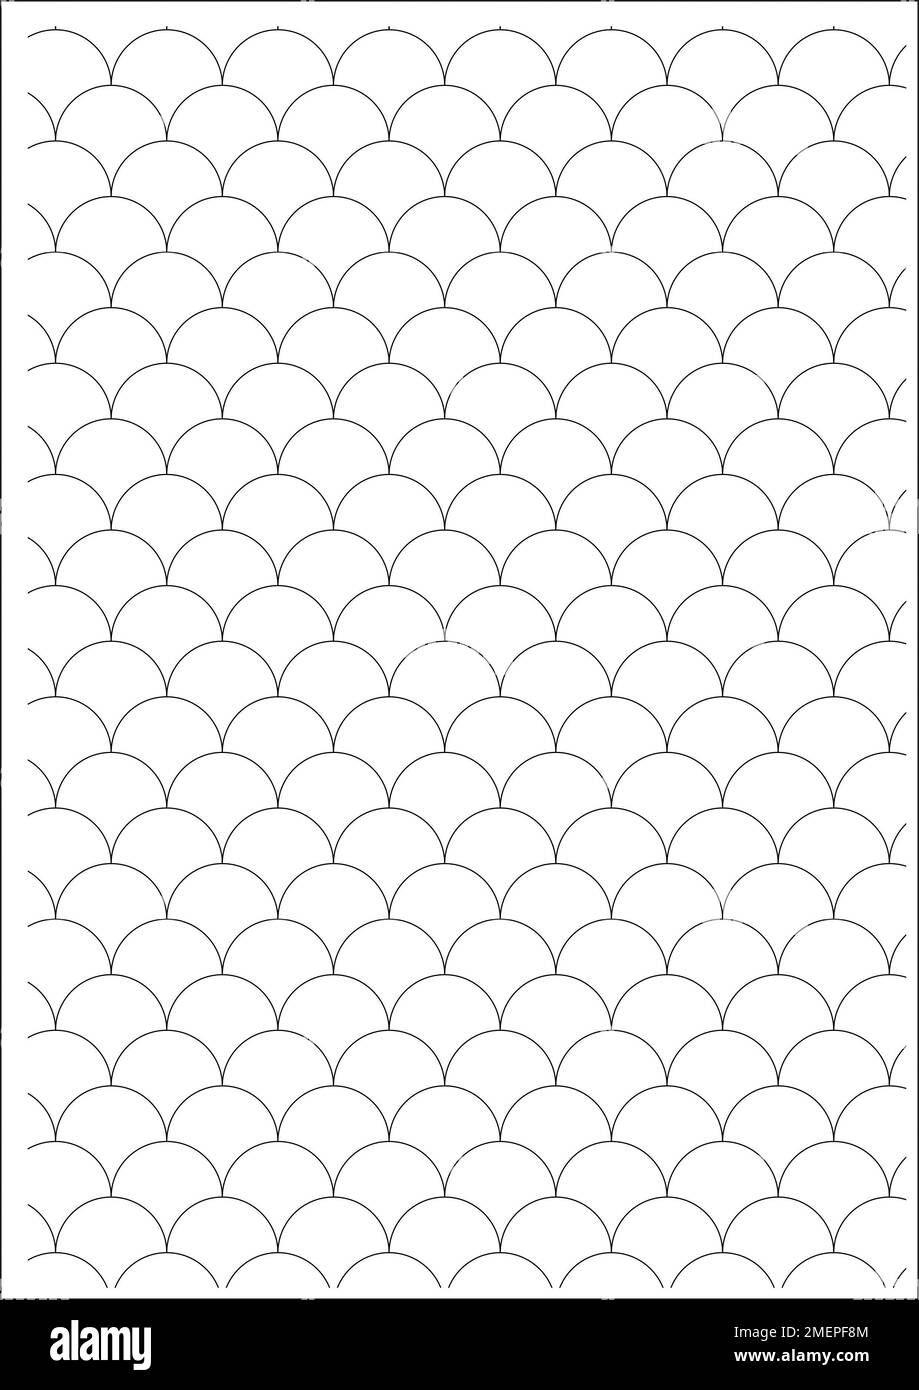 Background pattern with fish scale design Stock Photo